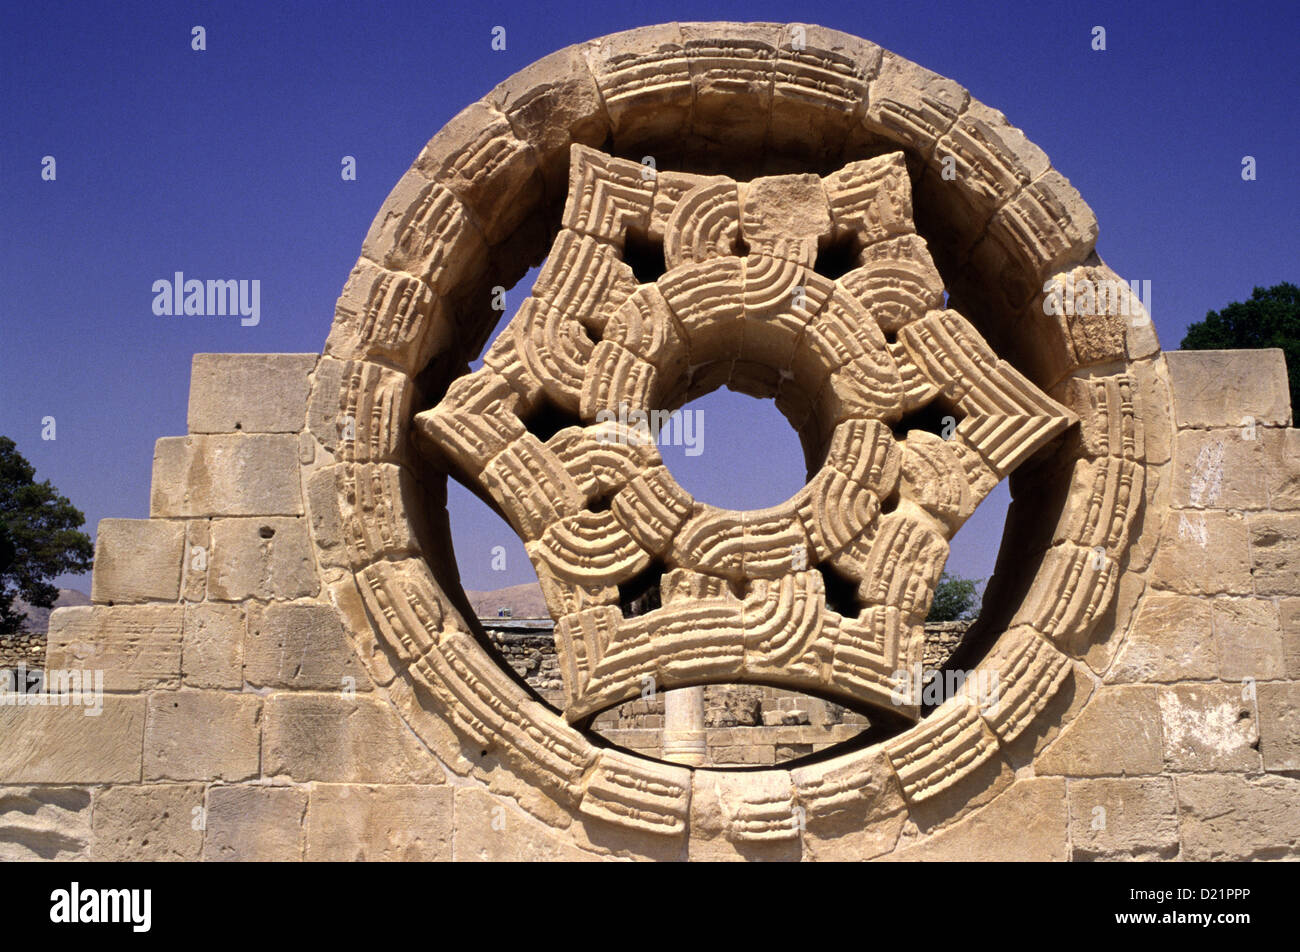 Reconstructed relief ornament in Khirbat al-Mafjar popularly known as Hisham's Palace an early Islamic archaeological site near Jericho, in the West Bank Israel Stock Photo